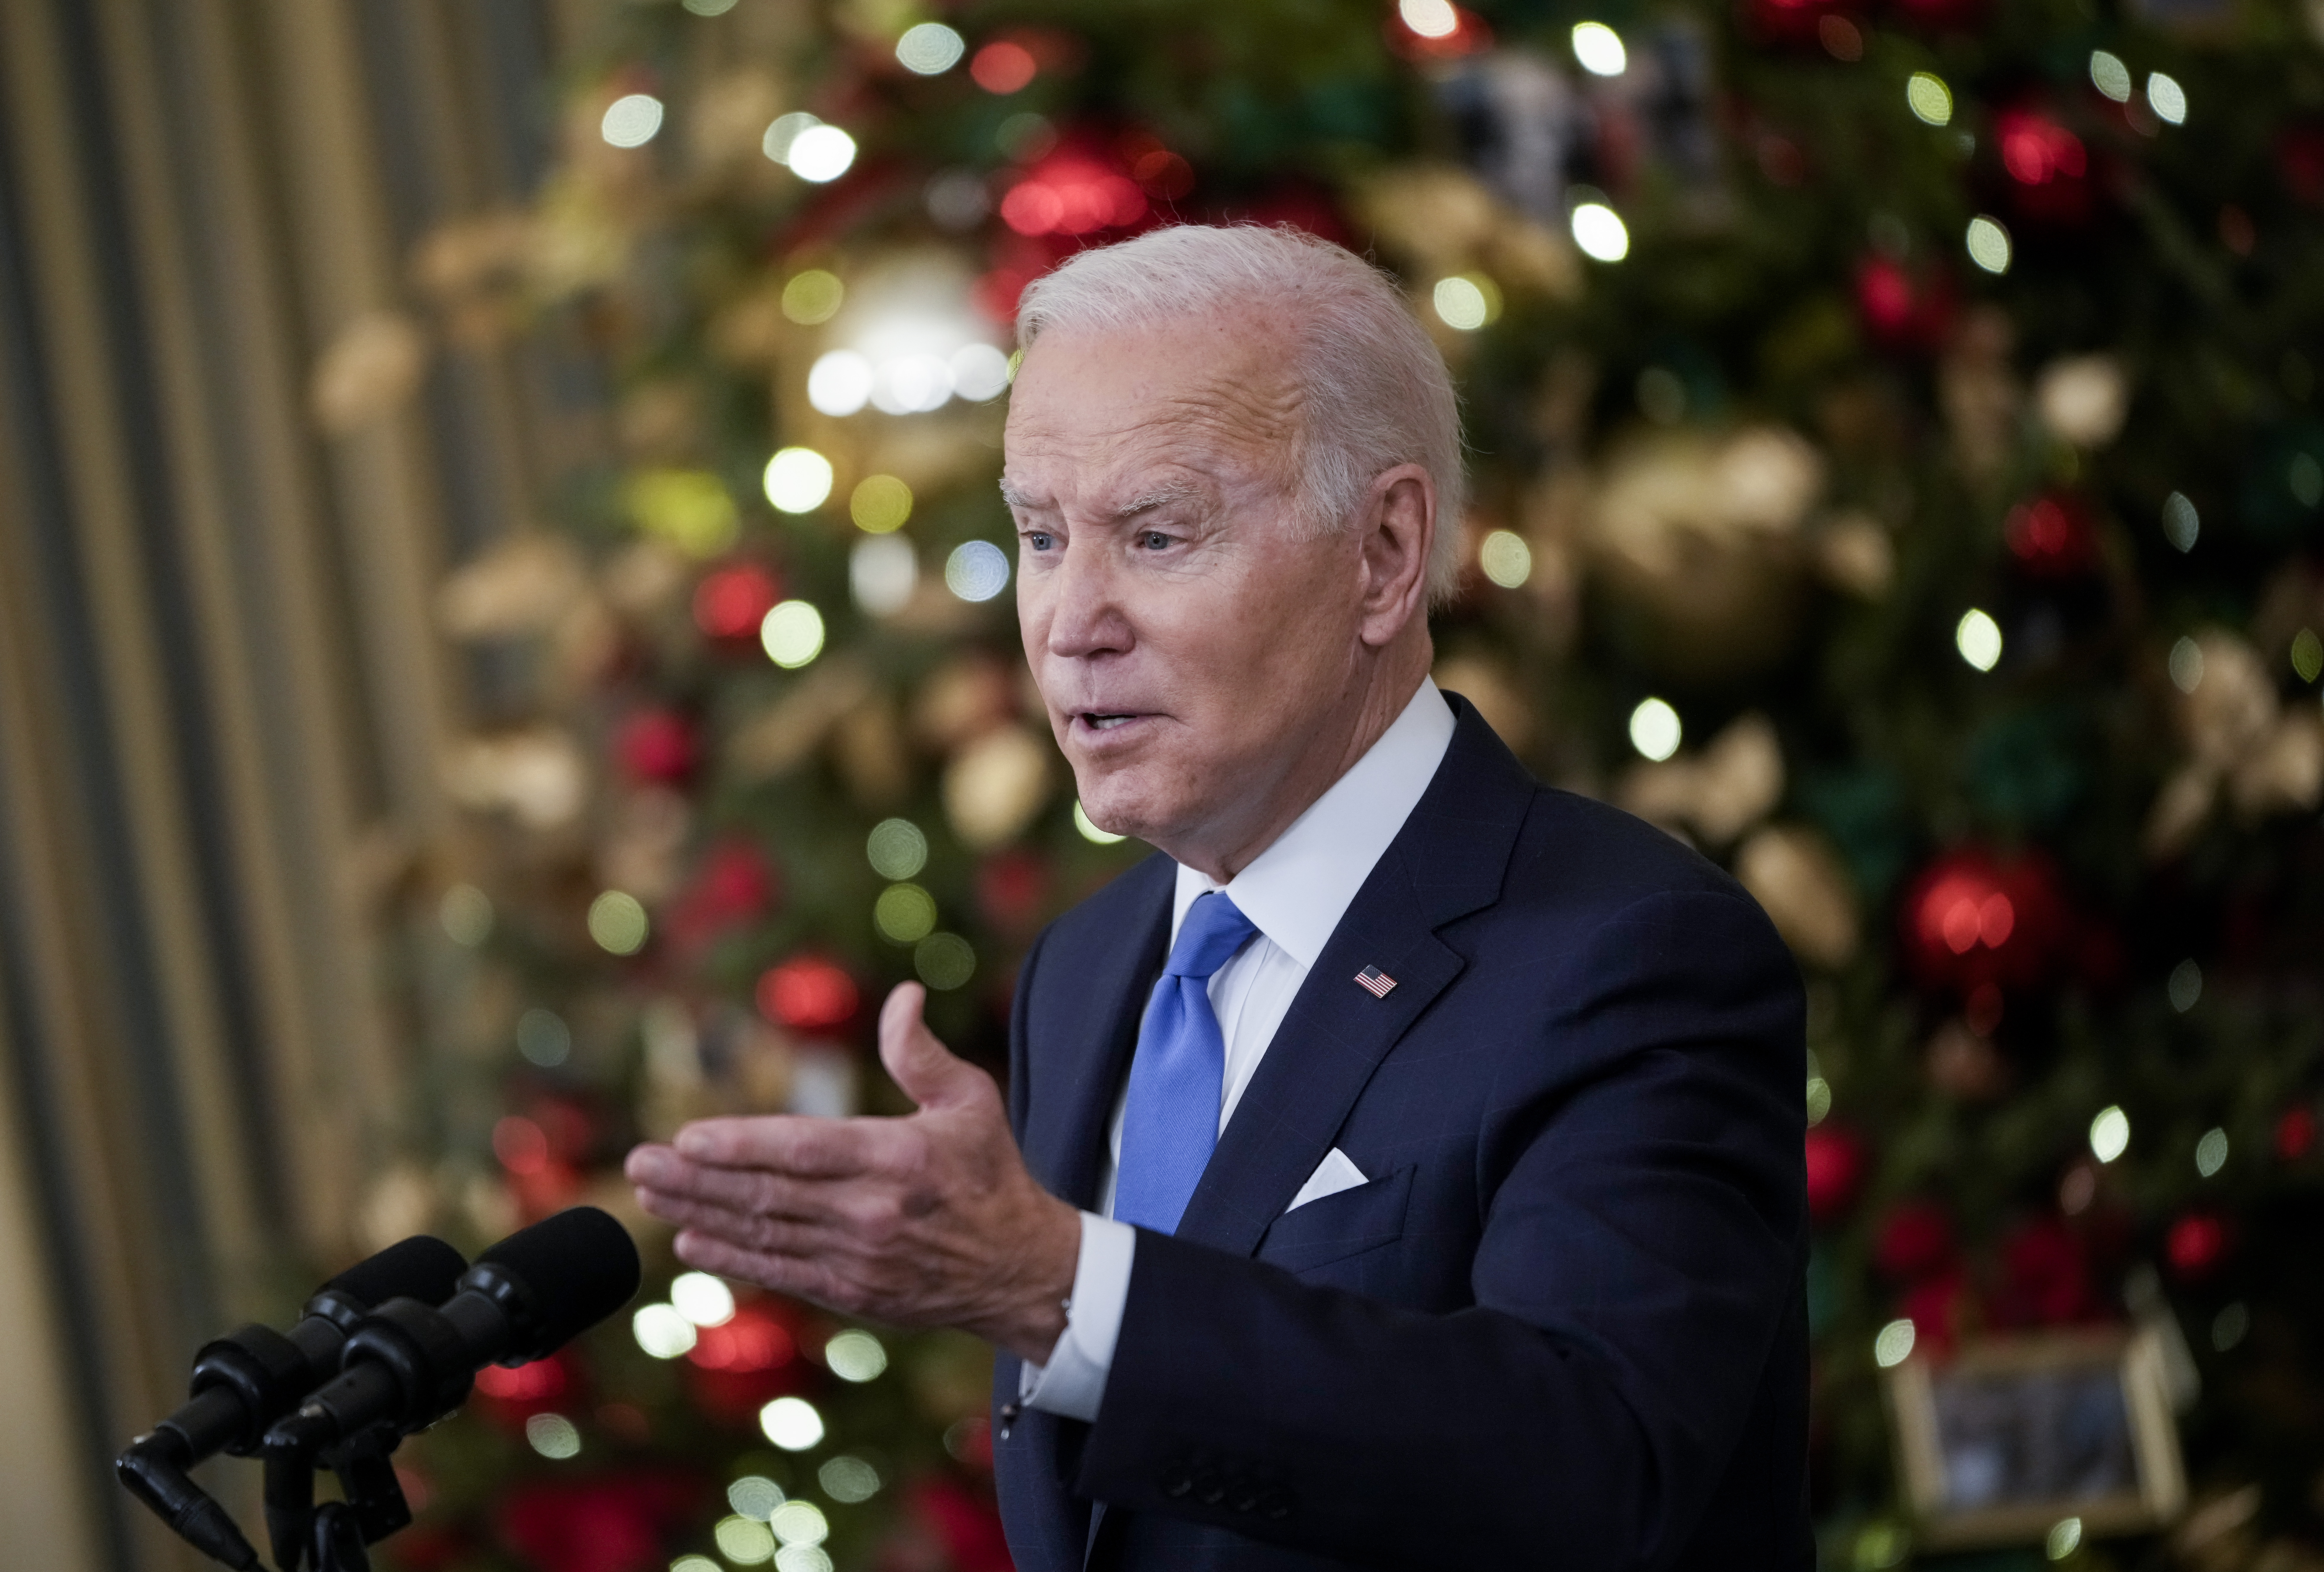 WASHINGTON, DC - DECEMBER 21: U.S. President Joe Biden speaks about the omicron variant of the coronavirus in the State Dining Room of the White House, December 21, 2021 in Washington, DC. As the omicron variant fuels a new wave of COVID-19 infections, Biden announced plans that will expand testing sites across the country, distribute millions of free at-home tests and boost federal resources to hospitals in need. (Photo by Drew Angerer/Getty Images)